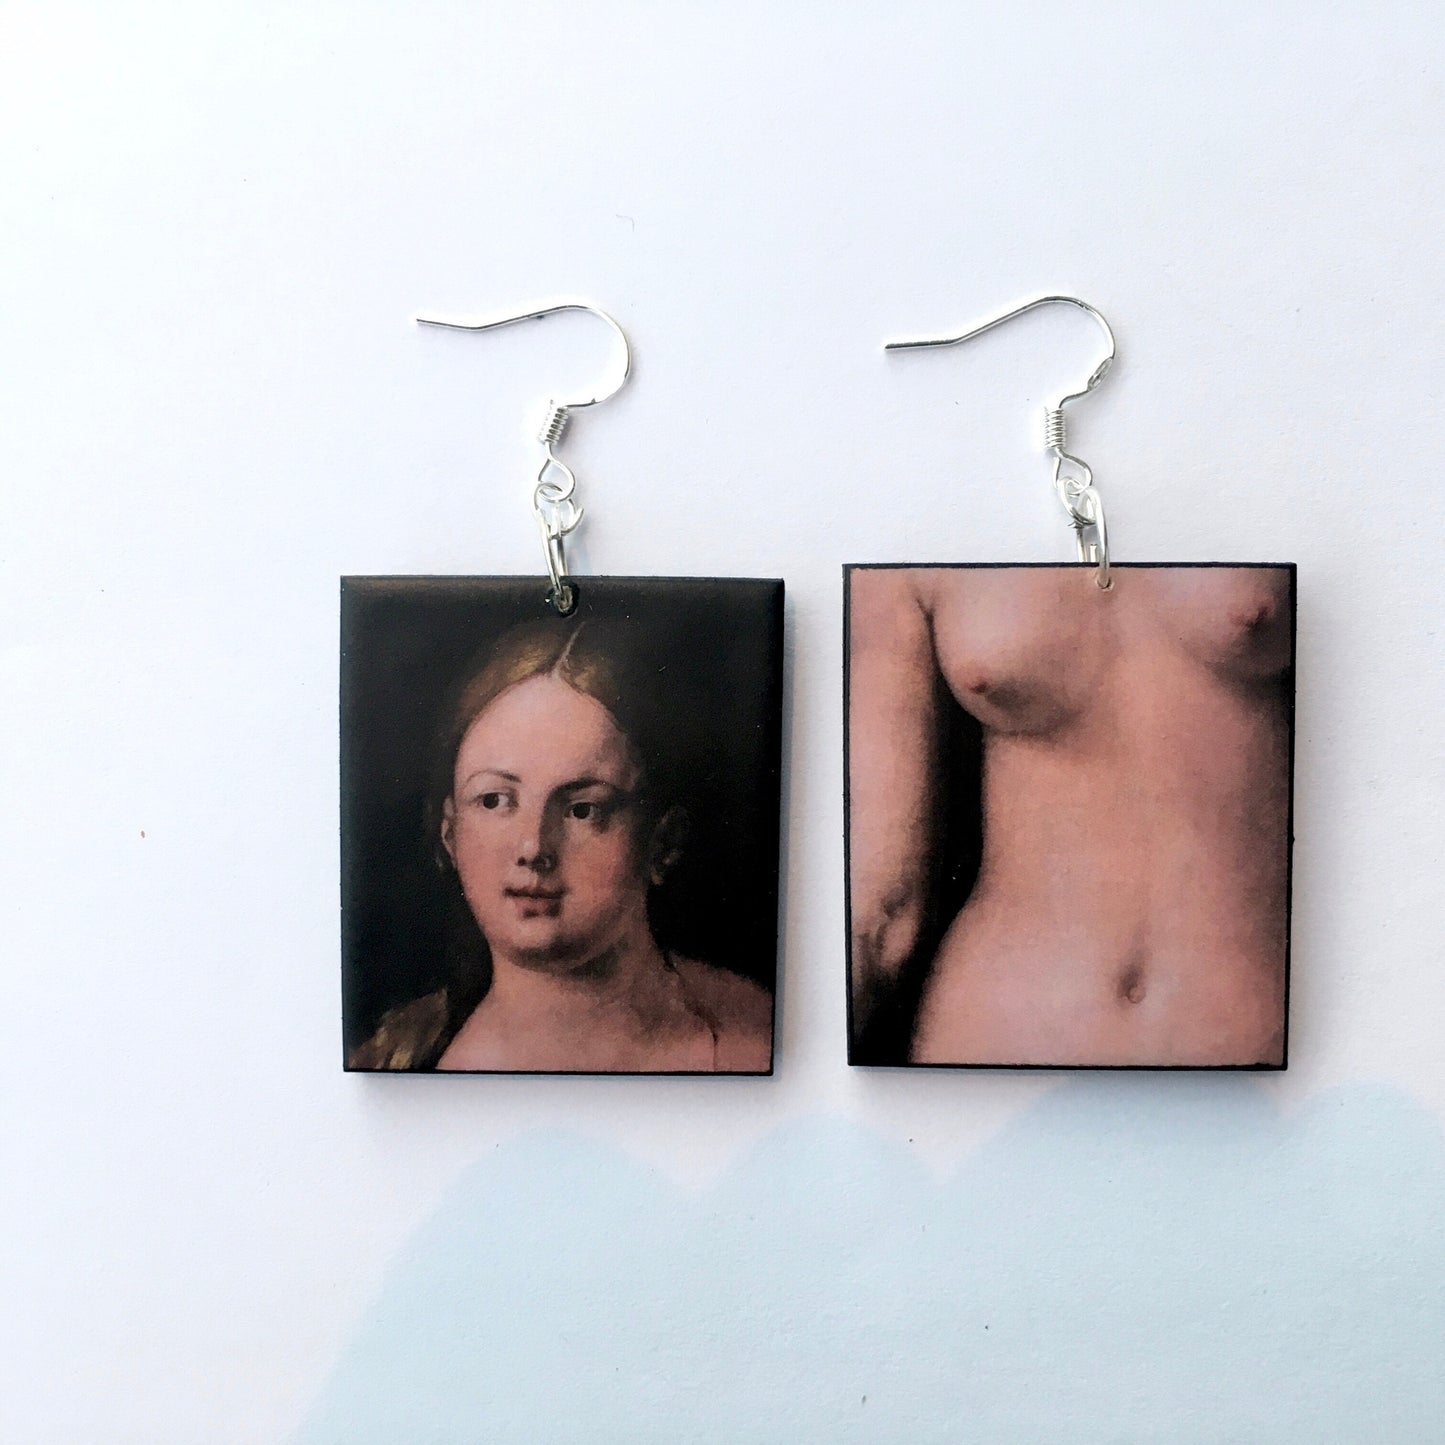 Albrecht Durer, Eve, gothic art style. Wooden, artsy earrings with details of Eve body, nude art earrings.